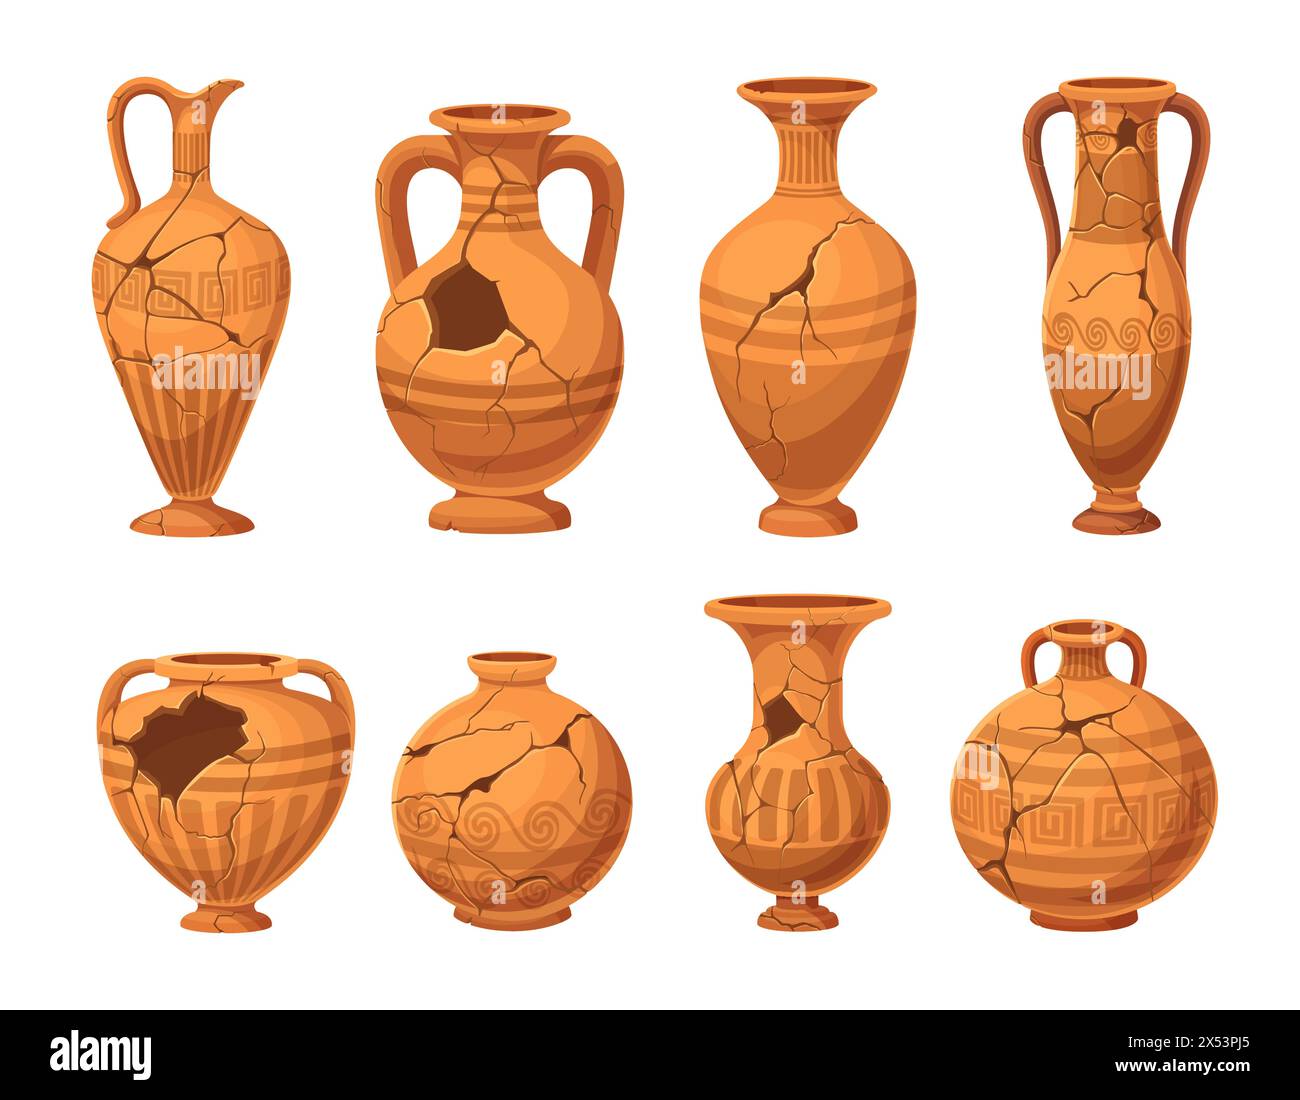 Ancient broken vases and pottery. Old ceramic cracked pots or jugs. Isolated vector set of shattered fragments of historical crockery, past civilization cultural heritage and archaeologists artefacts Stock Vector